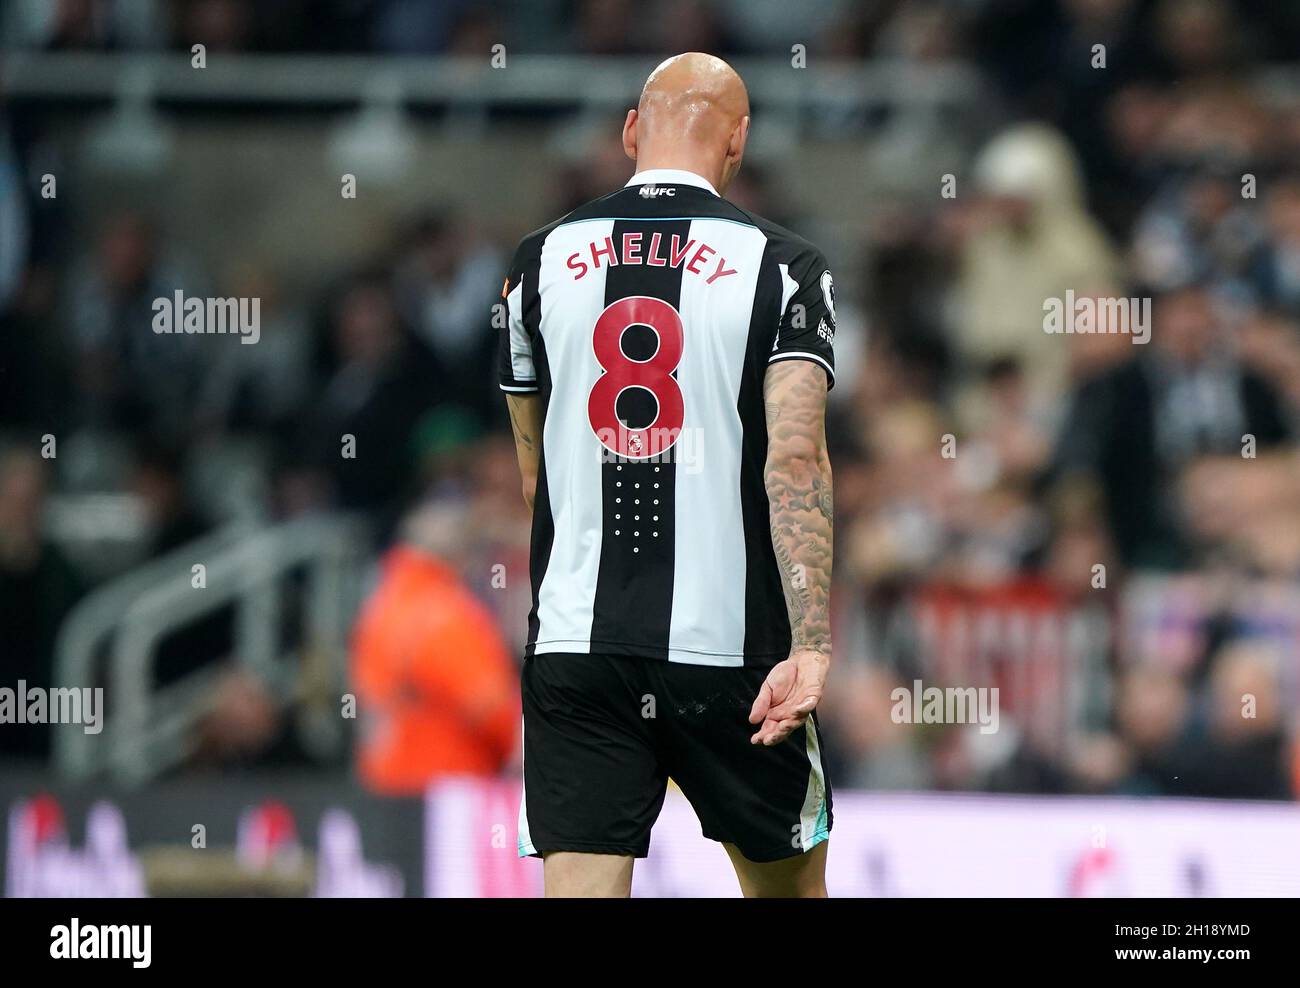 Newcastle United's Jonjo Shelvey reacts after being a red card after receiving two yellow cards during the League match at James' Park, Newcastle. Picture date: Sunday October 2021